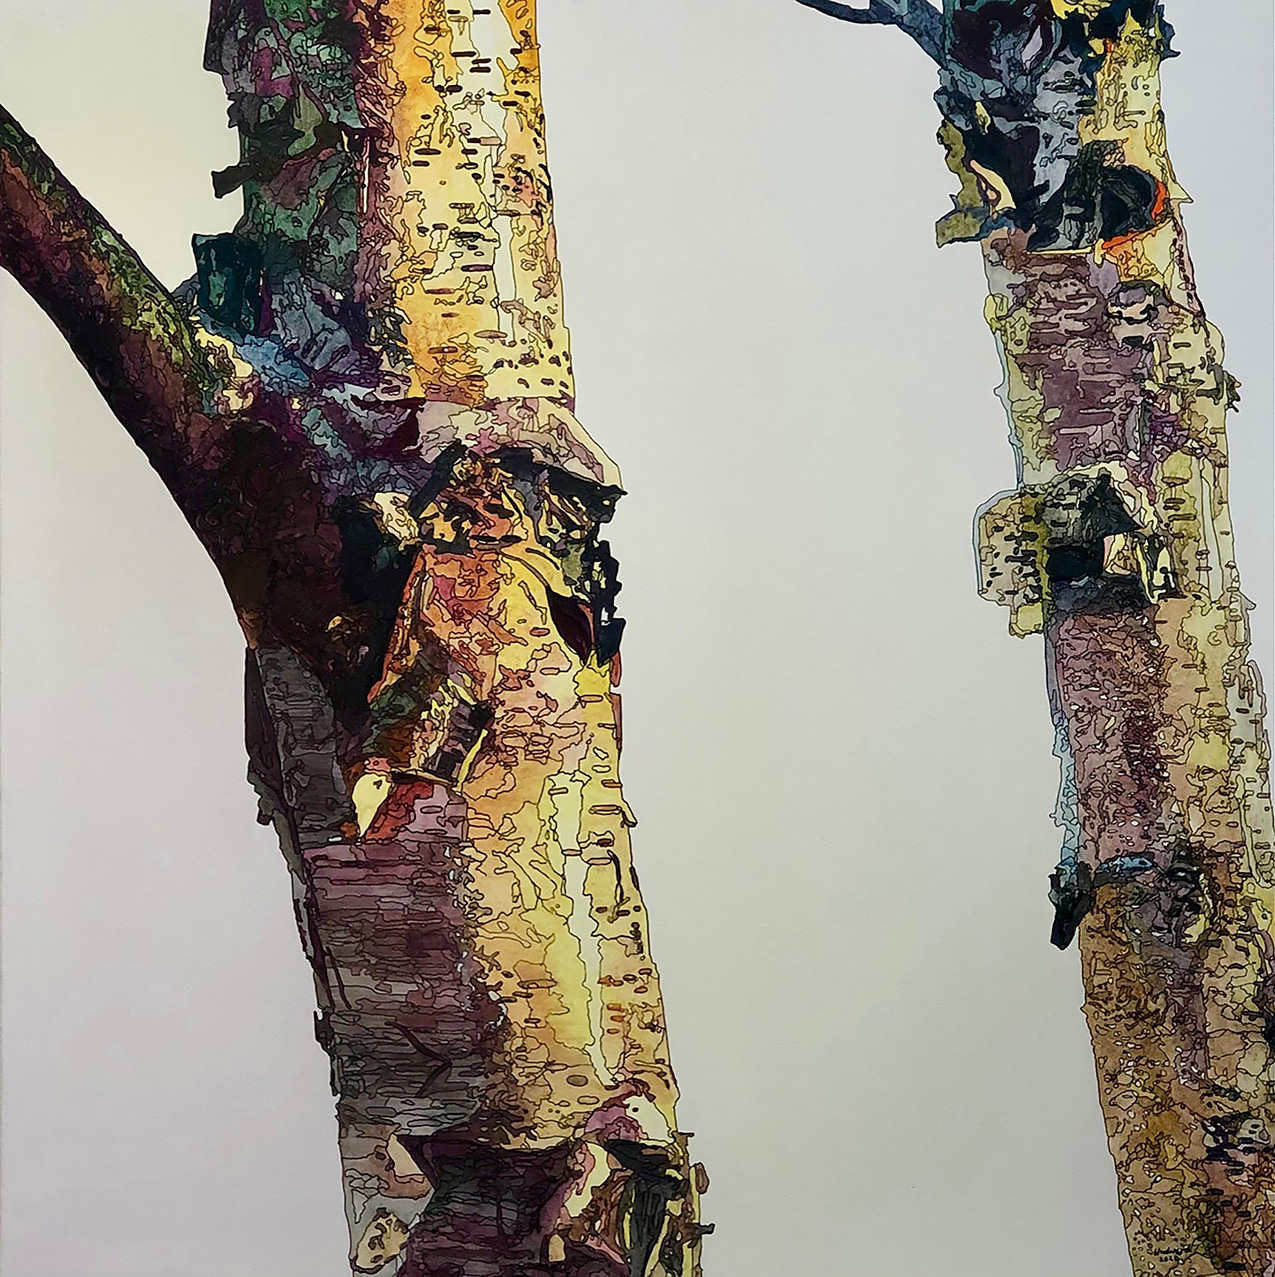 drawing of two birch trees made up of varying blocks of color from yellow bark to green and purple shadows